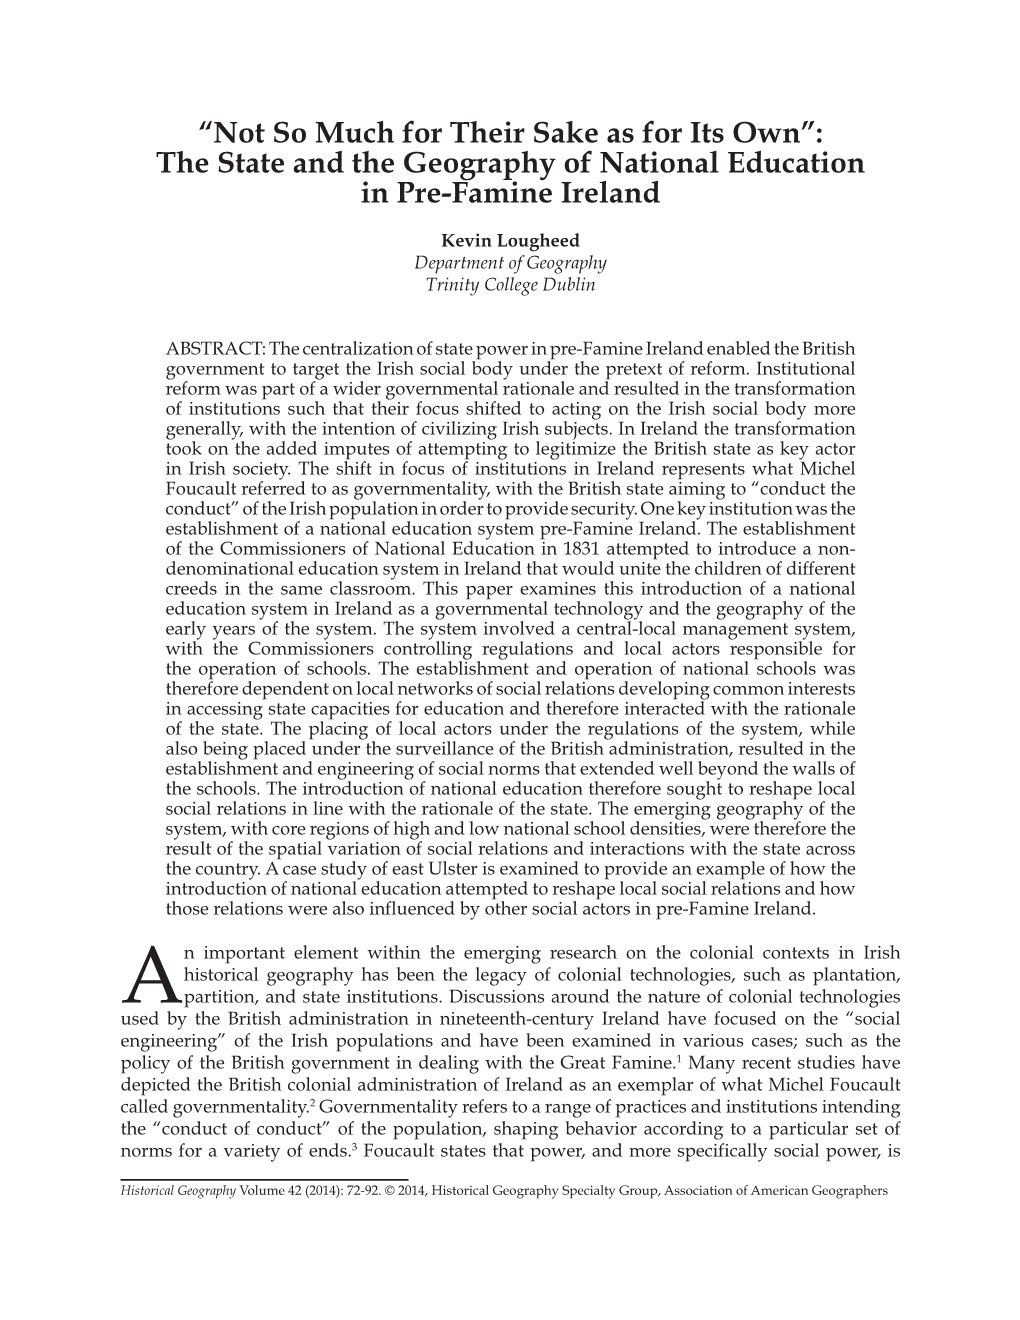 The State and the Geography of National Education in Pre-Famine Ireland